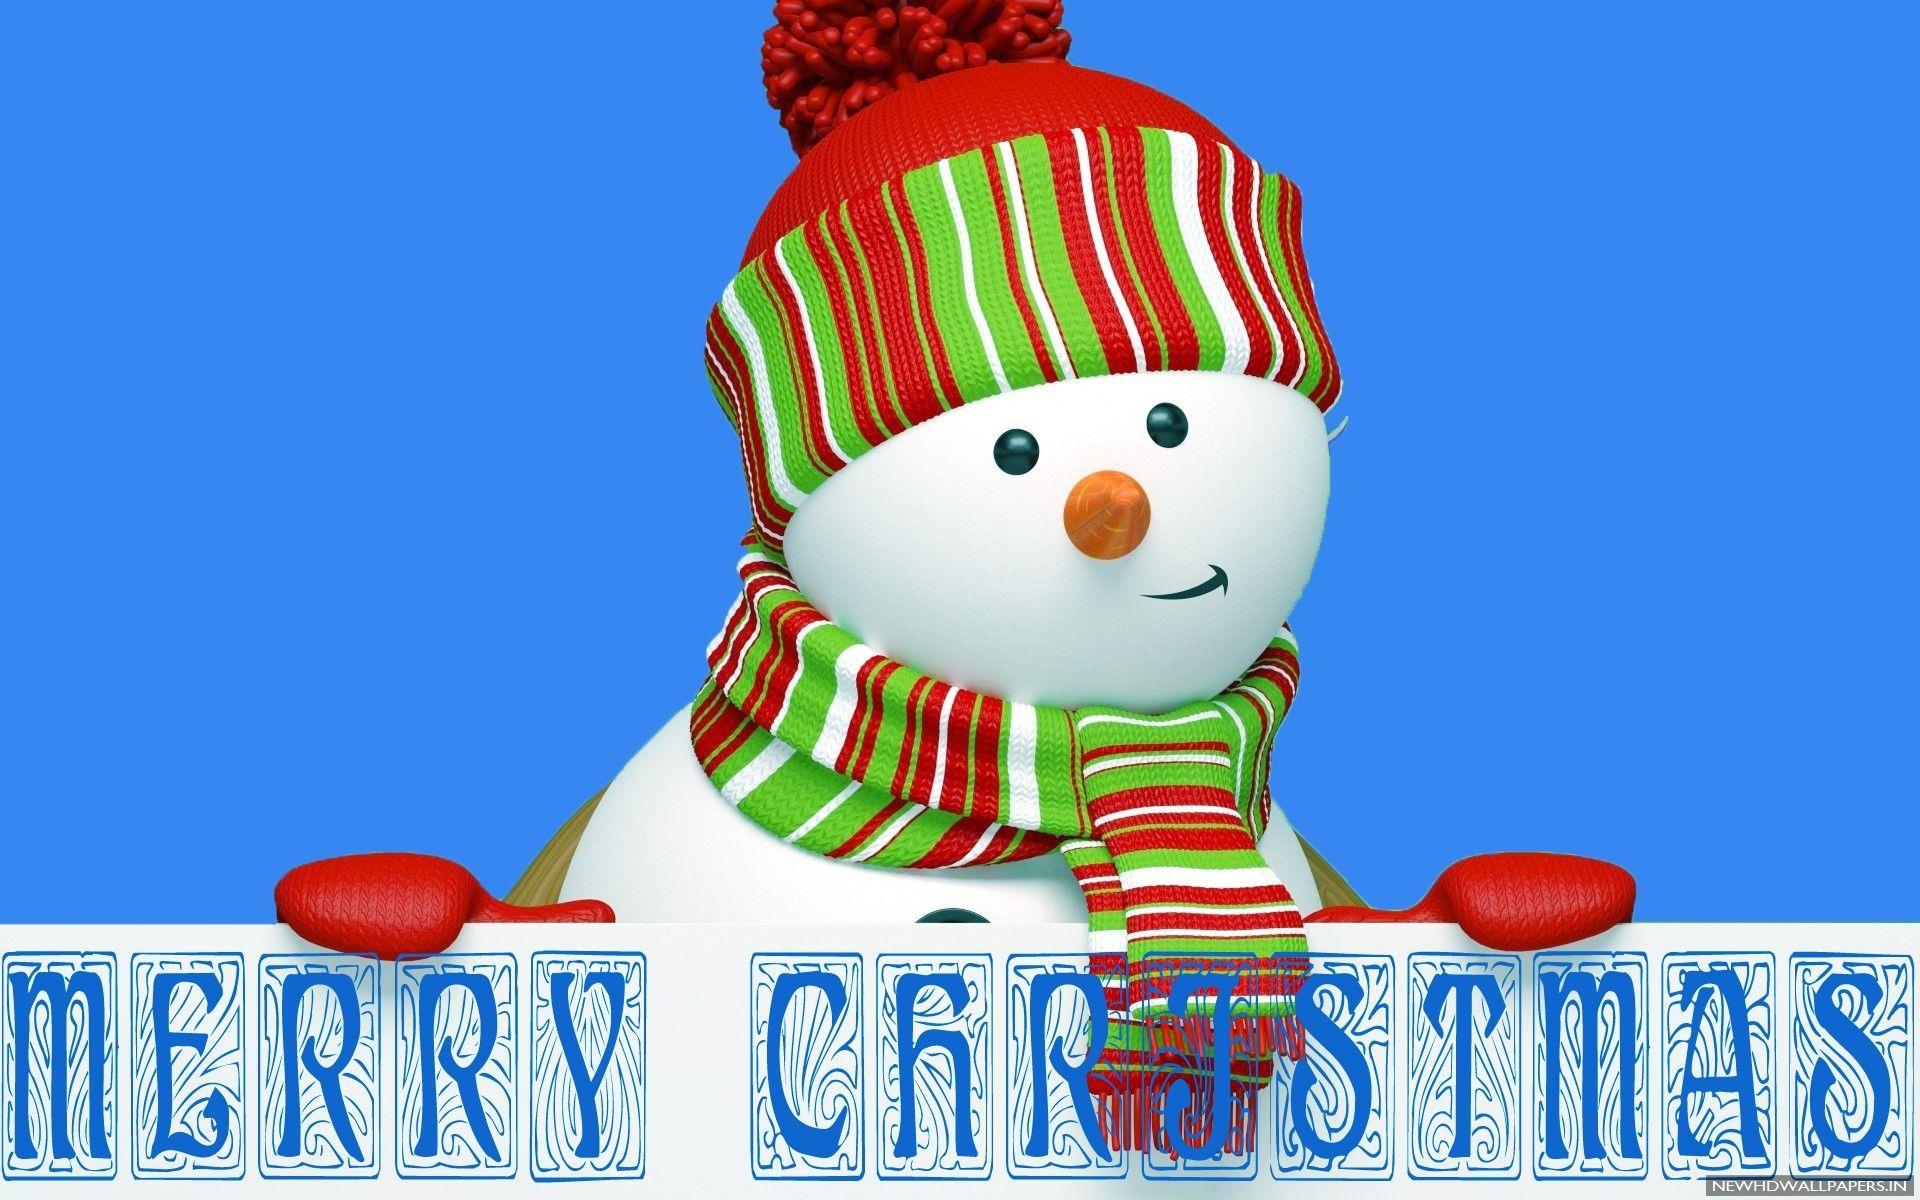 Cute Merry Christmas Wallpapers Wallpaper Cave